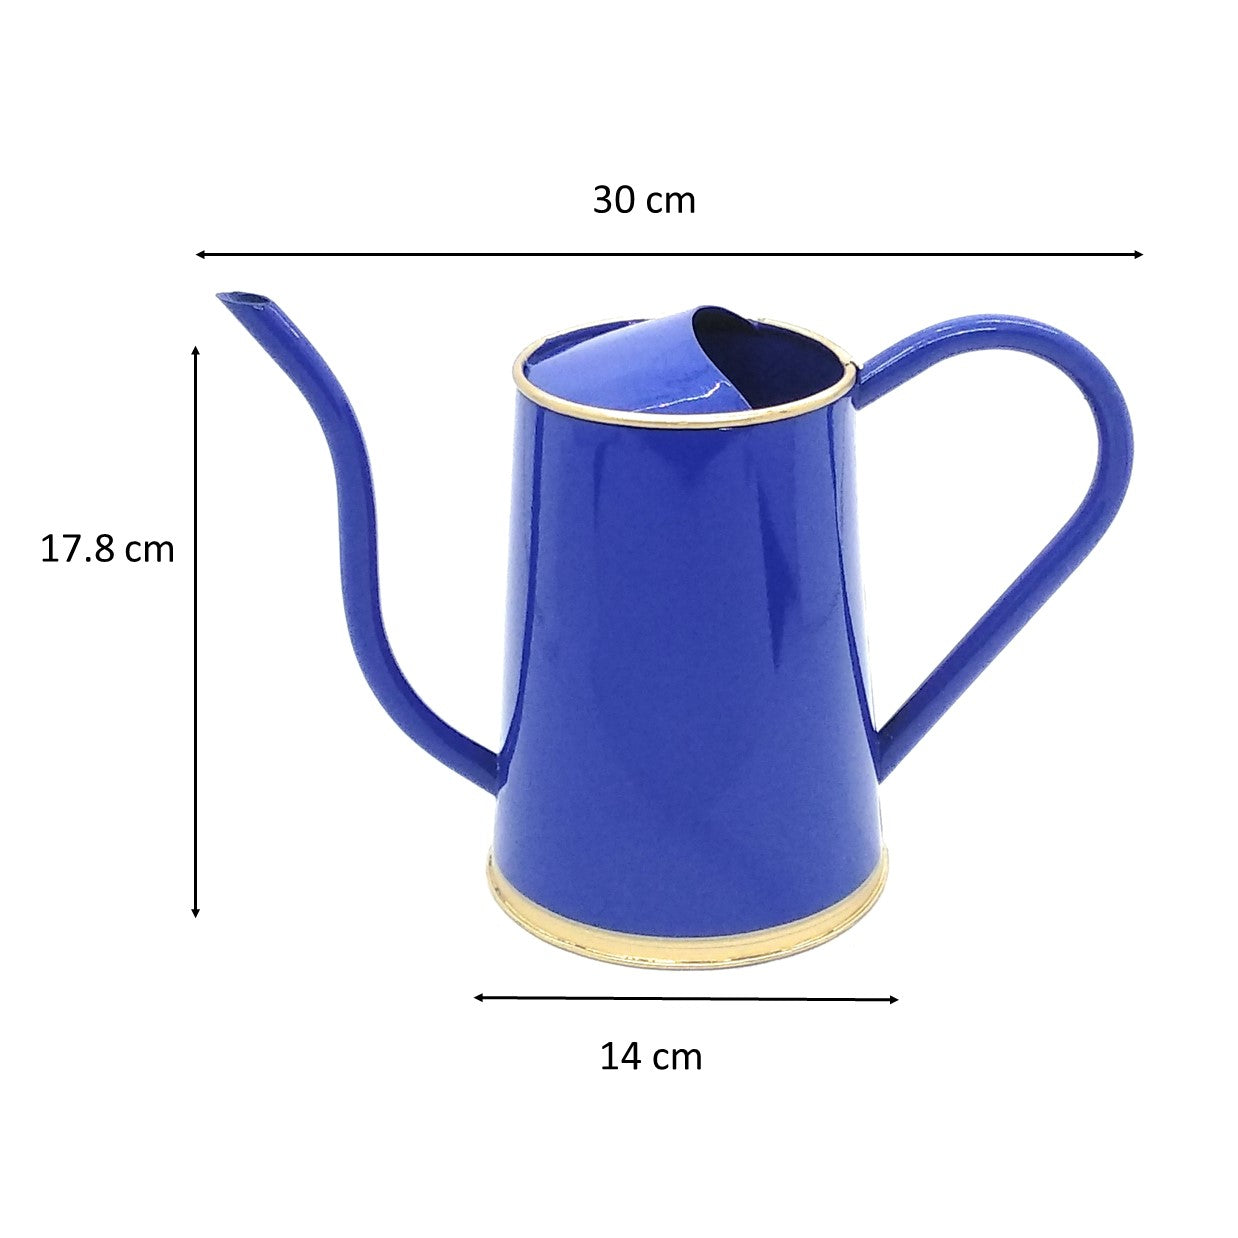 ecofynd 2 Liter Blue Watering Can with Long Spout Watering Can freeshipping - Ecofynd